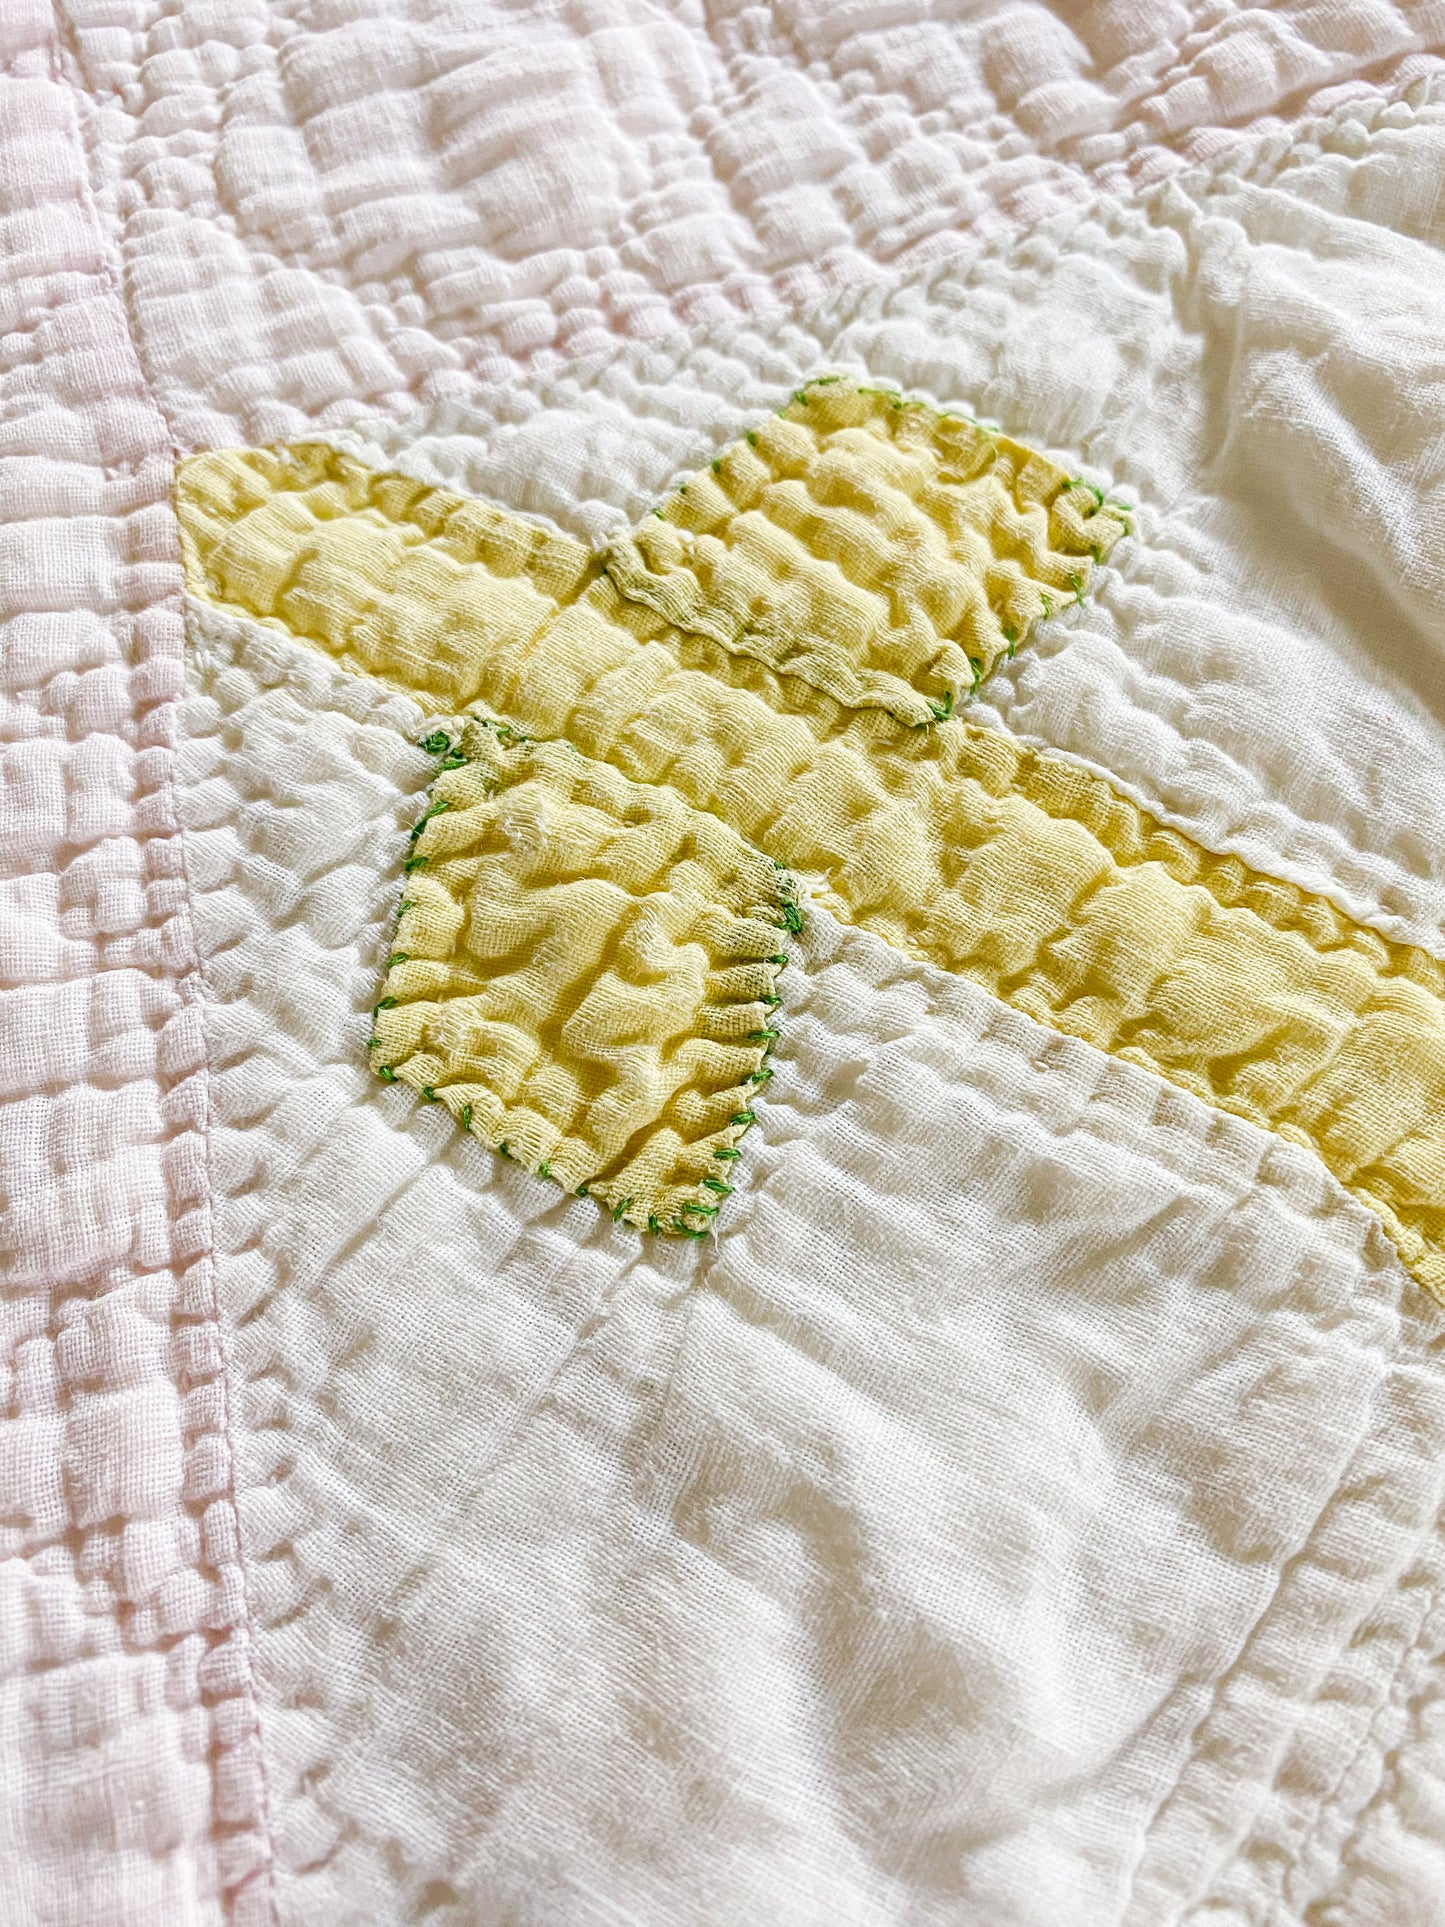 Vintage Carolina Lily Applique Quilt | Faded Pink and Lime Green Pastel Bedding | Cutter Stacker Quilt